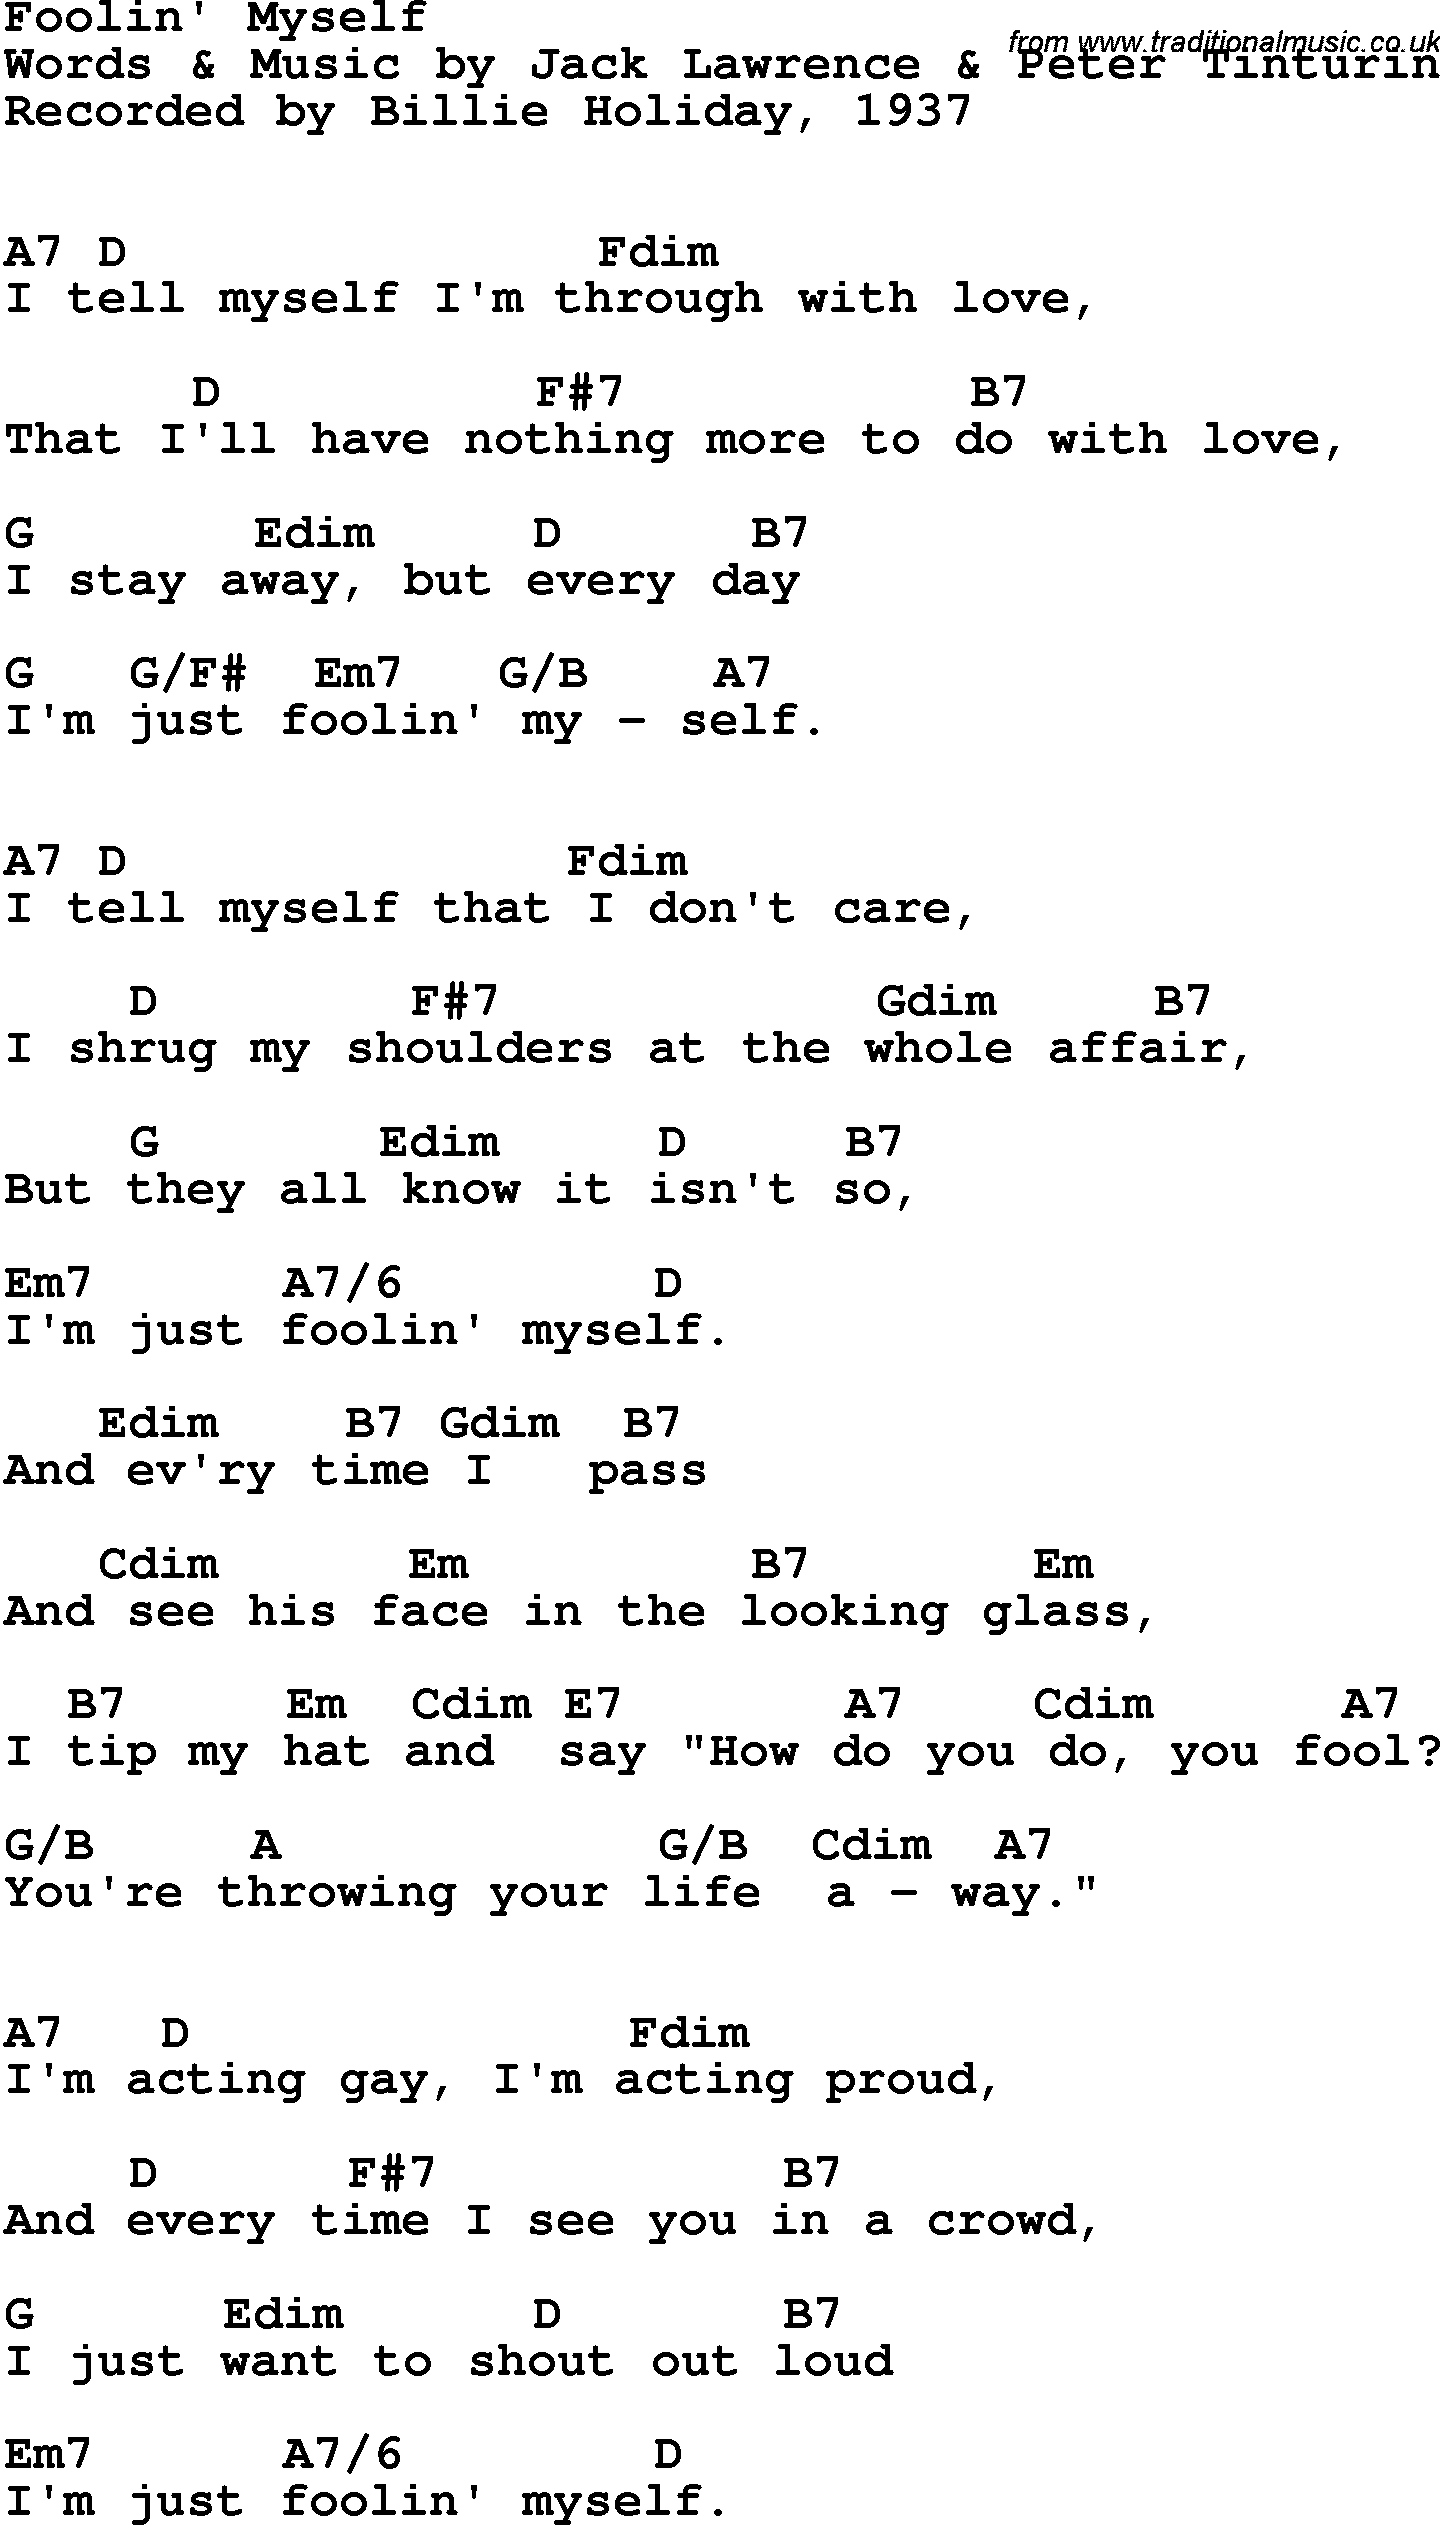 Song Lyrics with guitar chords for Fooling Myself - Billie Holiday, 1937